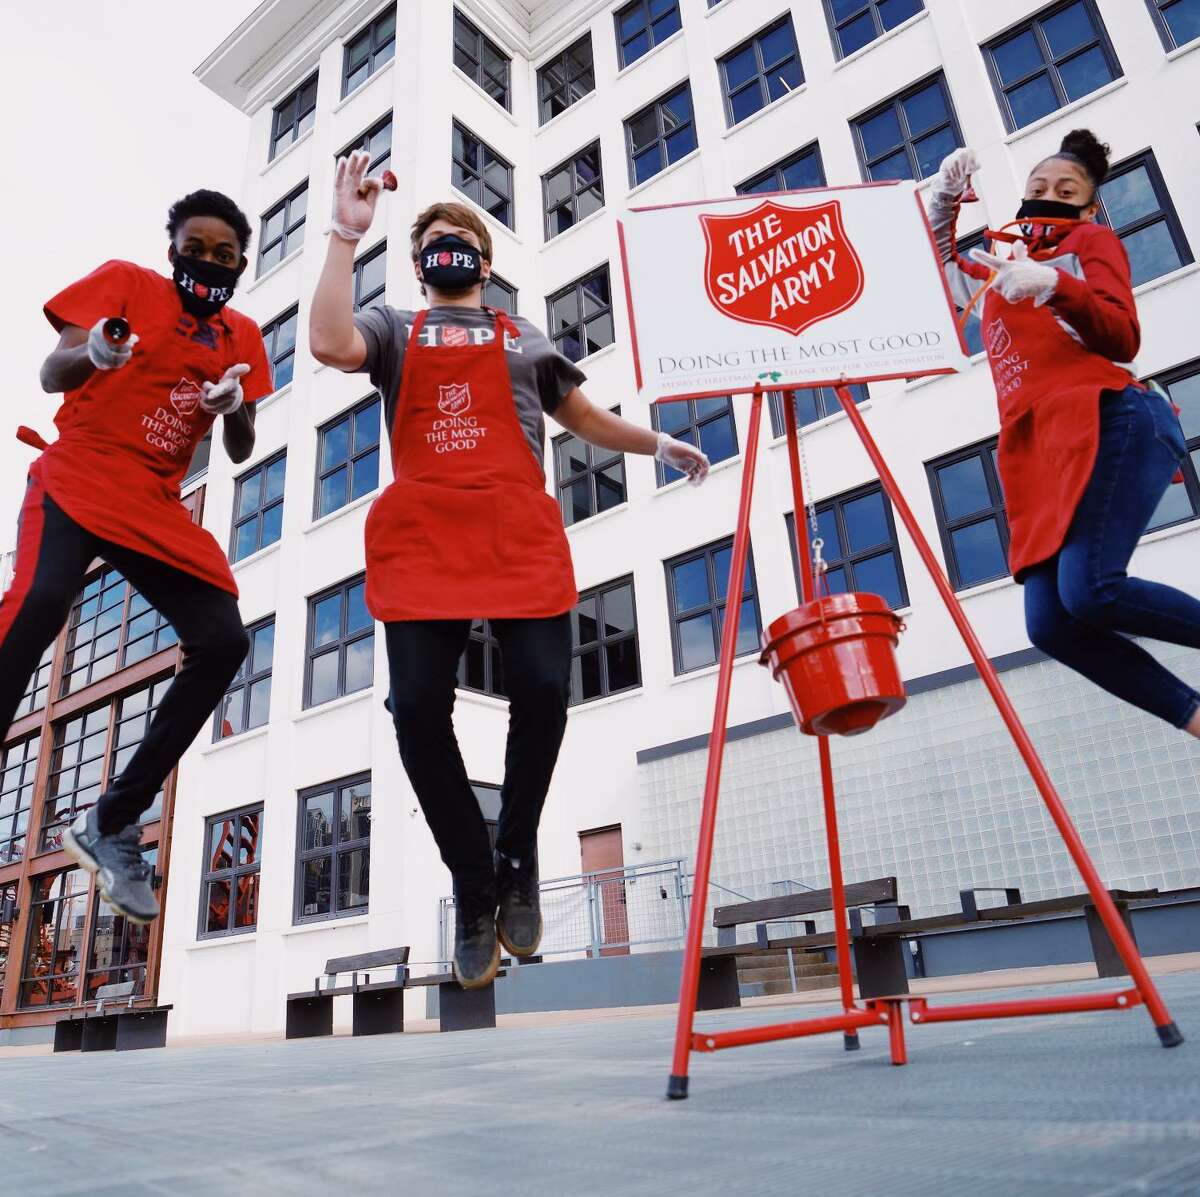 The Red Kettle Challenge provides a new, online option to the traditional Red Kettles that raise funds supporting those in need.